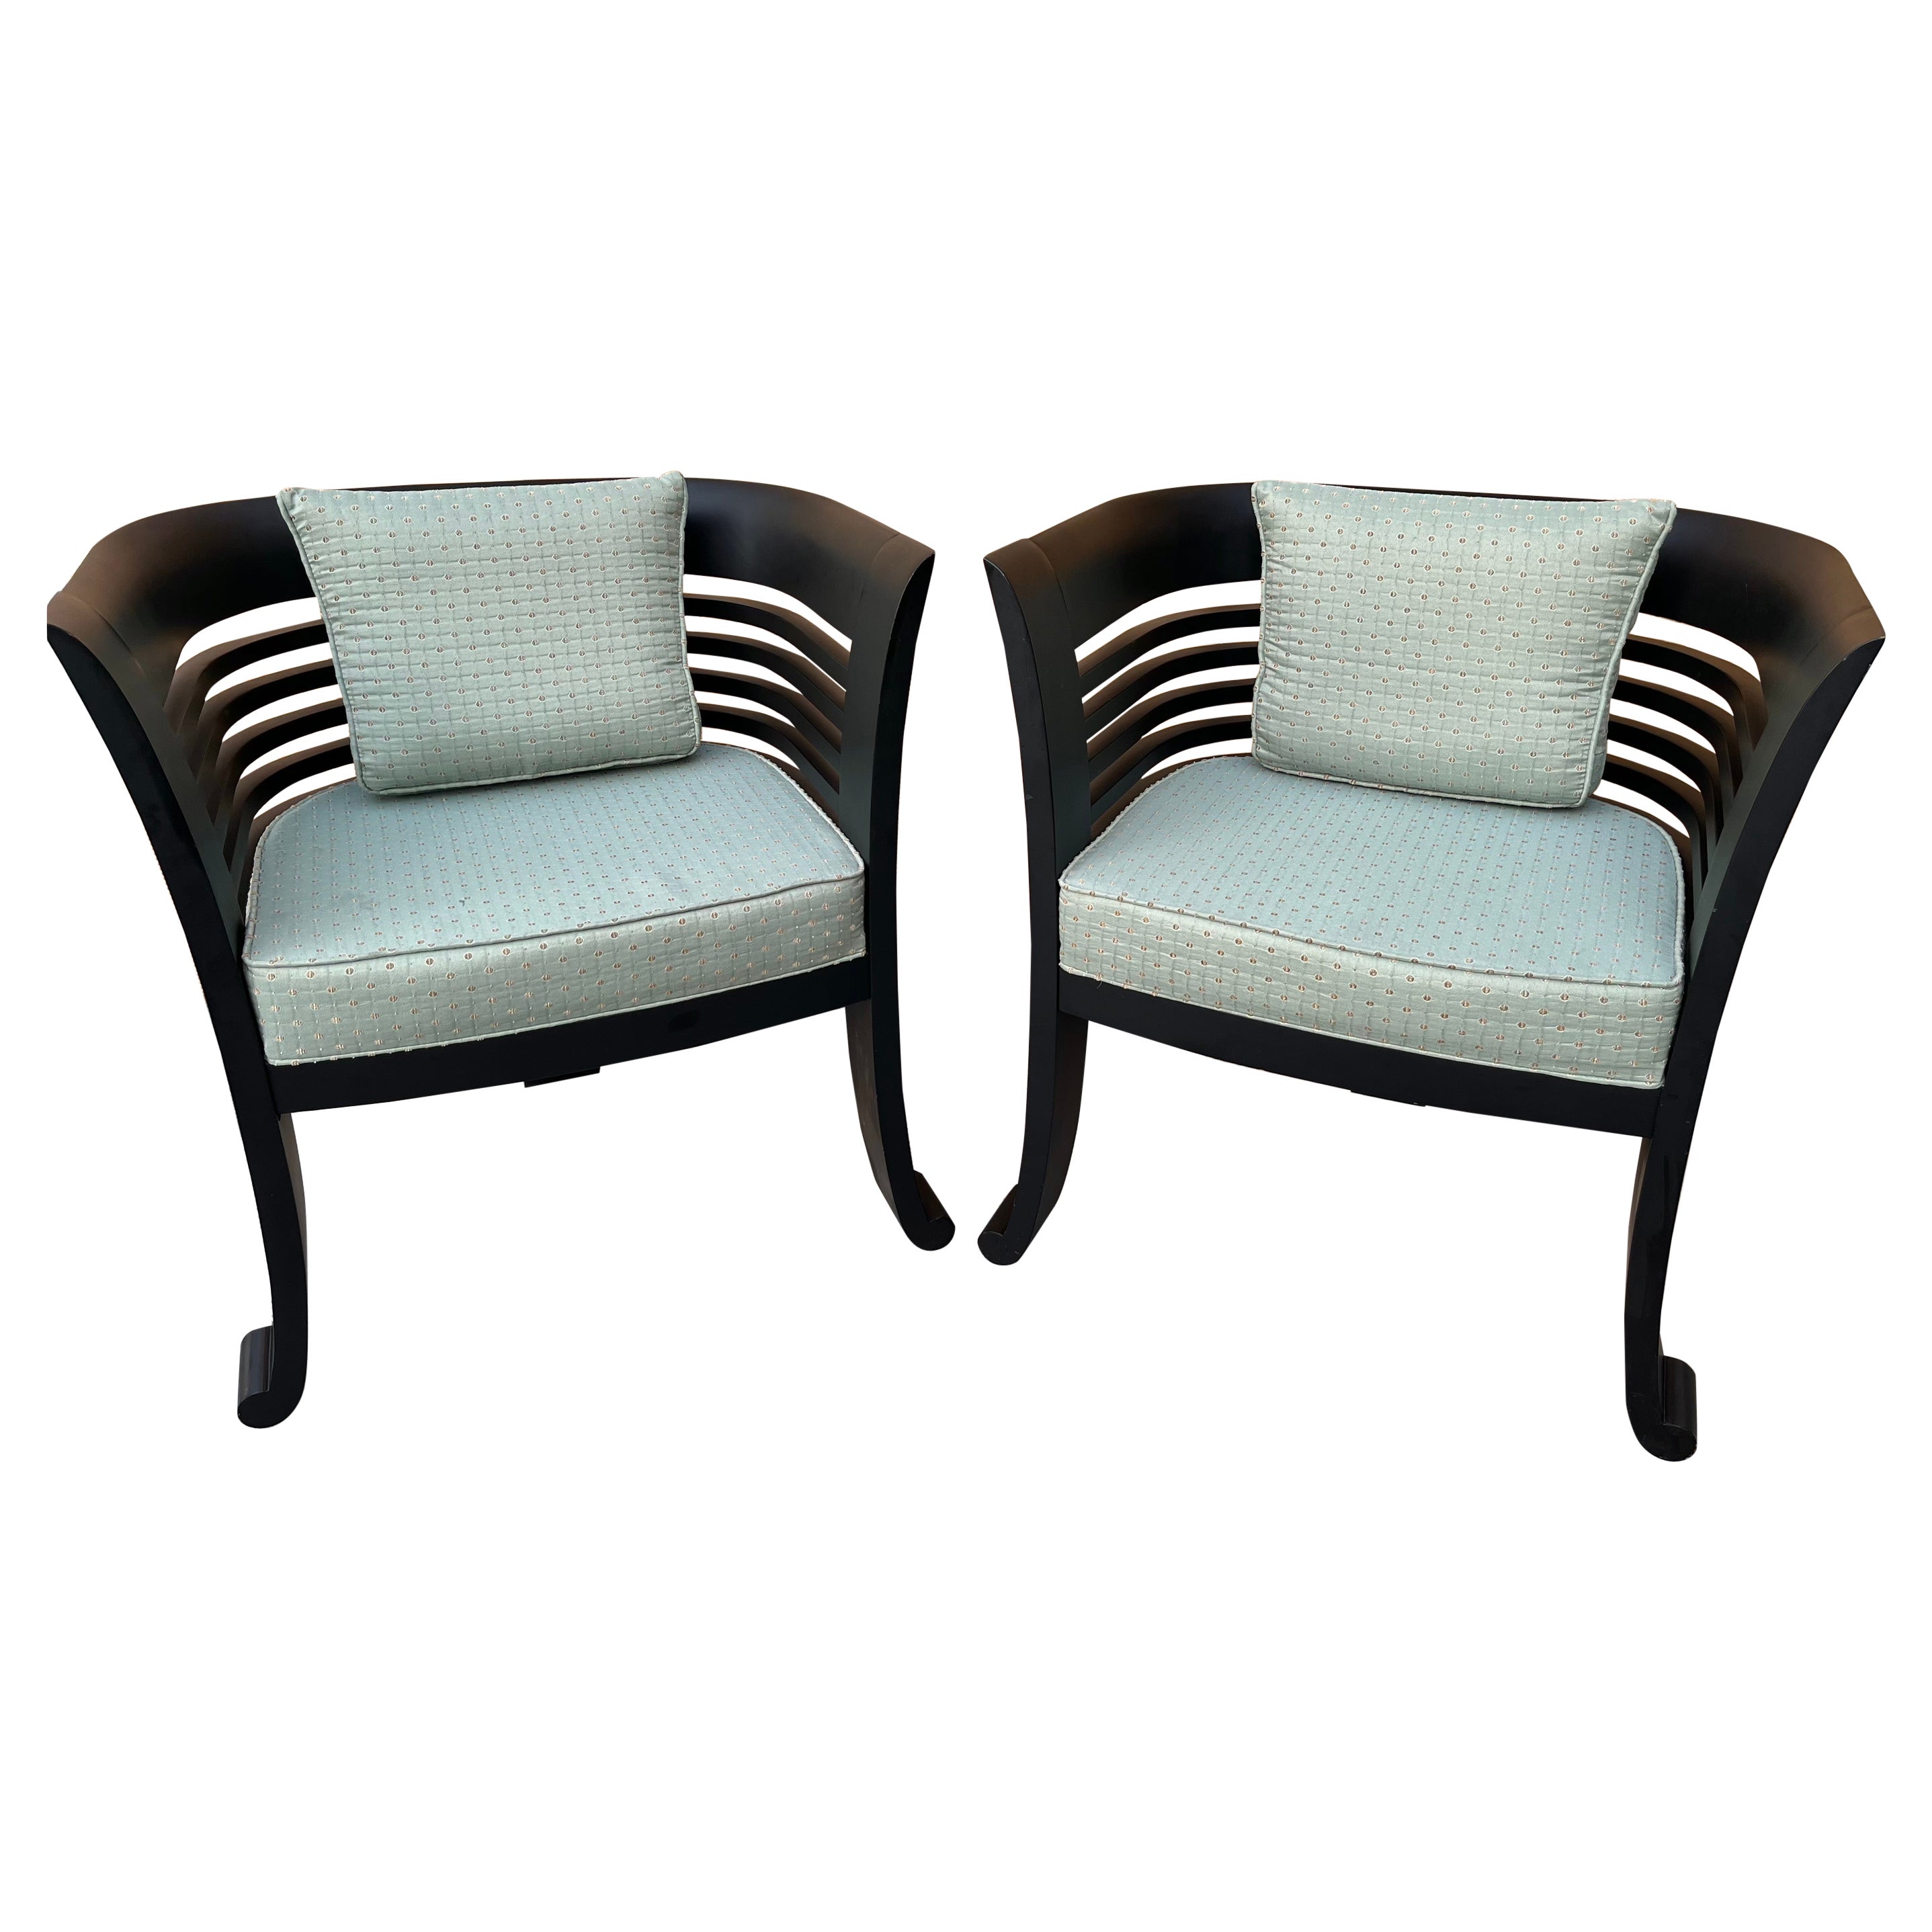 A pair of Early 21st Century Three Legs Chinoiserie inspired Lounge Chairs 